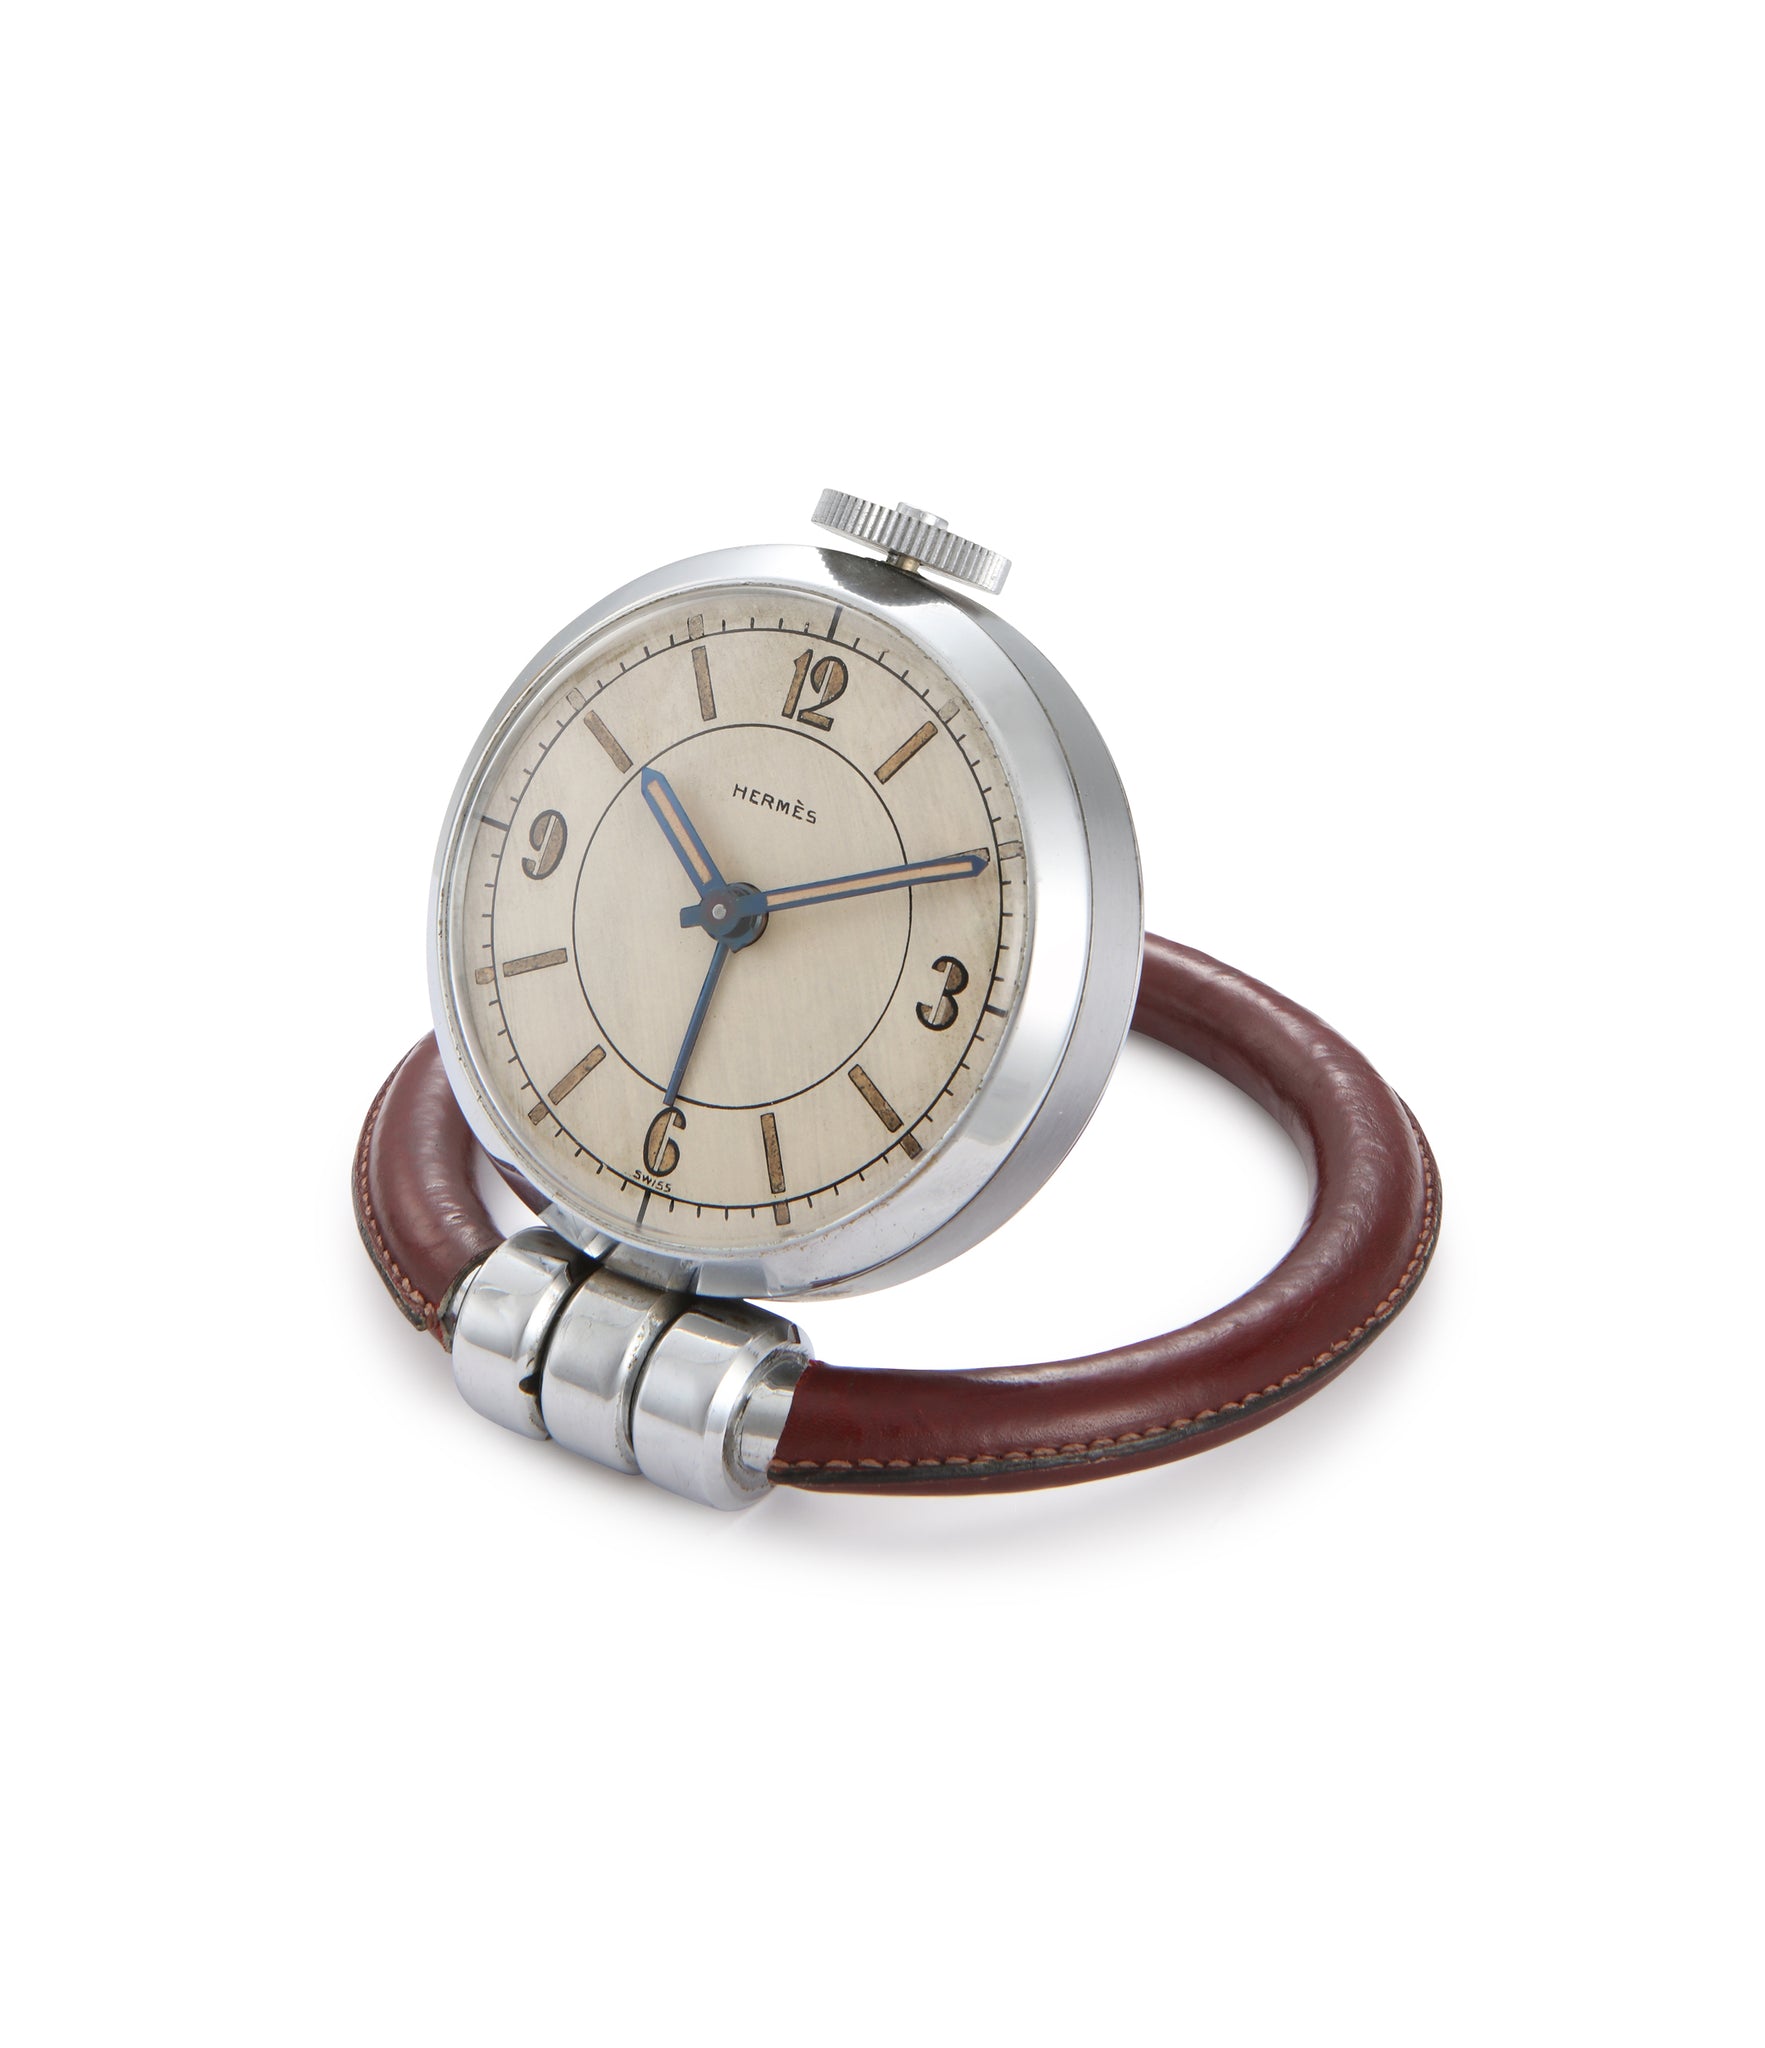 Travel Alarm Clock | “Ring” Style | Stainless Steel & Leather Case | A Collected Man London